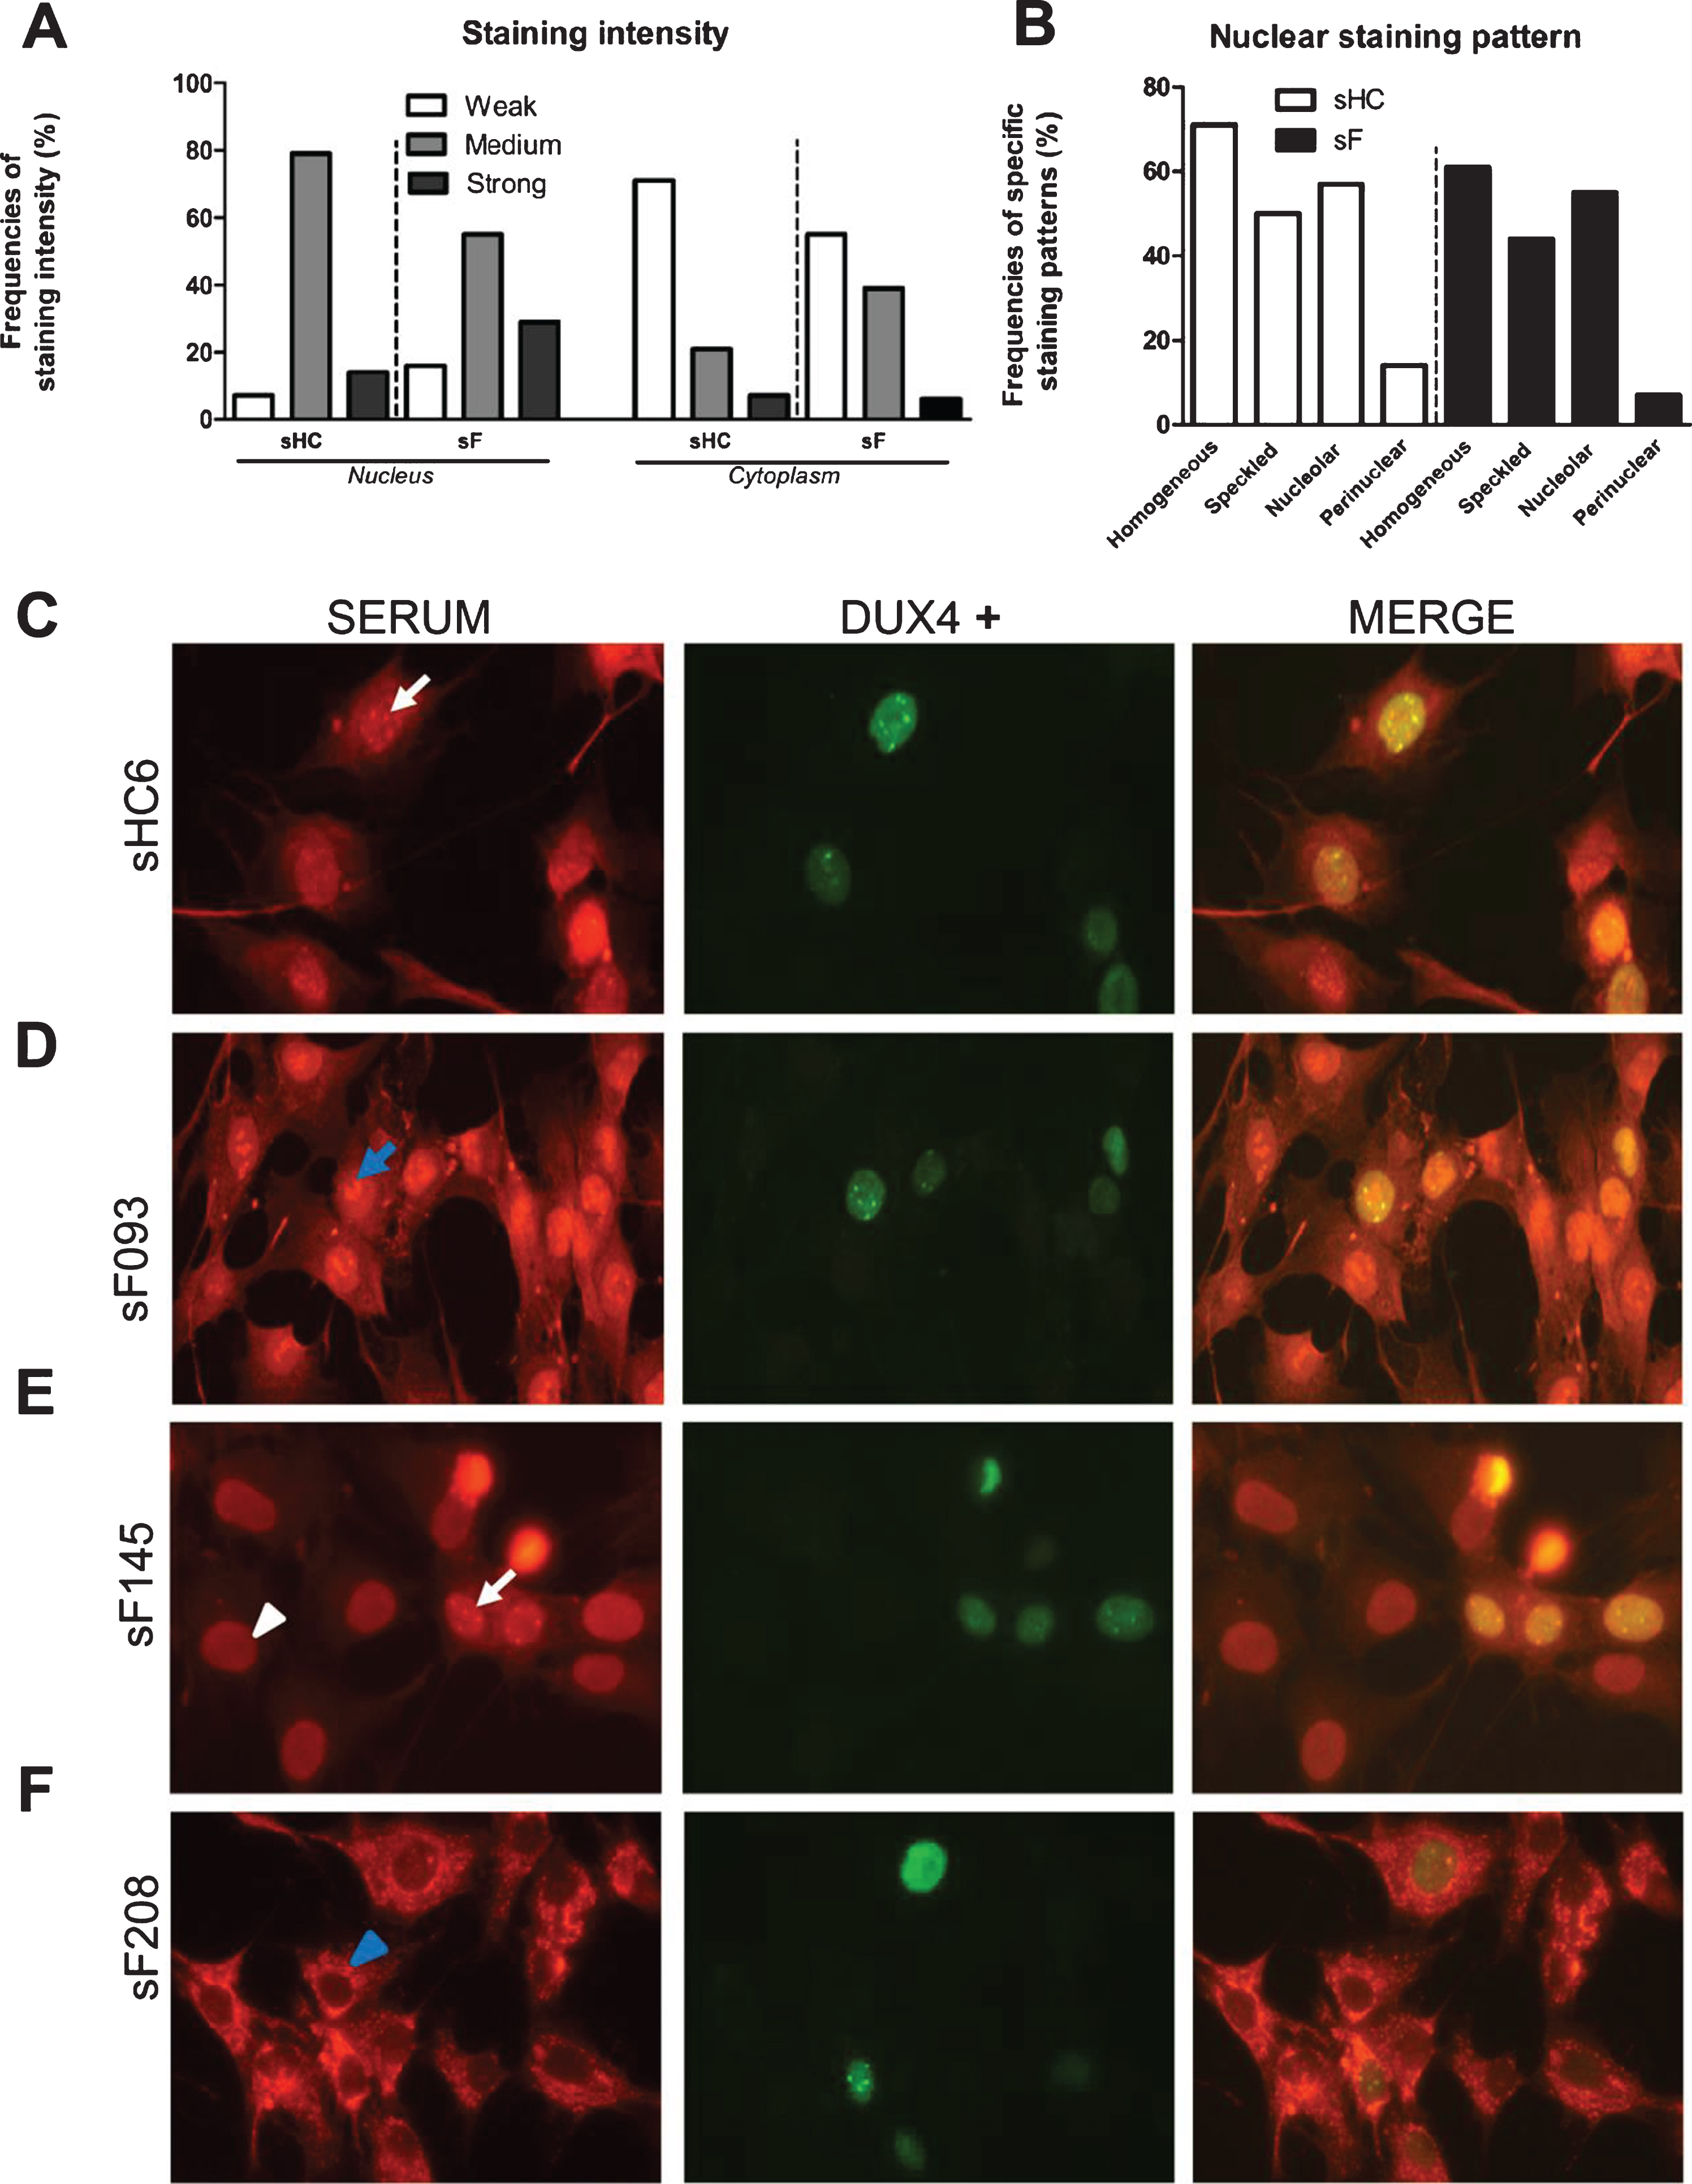 Immunofluorescence analysis of the reactivity of FSHD and HC sera with DUX4-expressing myoblasts. DUX4-expressing myoblasts were fixed and incubated with either patient (N = 85) or control sera (N = 14) and with an anti-DUX4 antibody. Bound antibodies were visualized by fluorescent secondary antibodies. (A) Nuclear and cytoplasmic staining intensity frequencies scored as weak, medium, and strong. (B) (Peri)nuclear staining pattern frequencies. (C - F) White arrows indicate nuclear speckles; blue arrows indicate nucleolar staining; white arrowheads indicate homogeneous nuclear staining; blue arrowheads indicate perinuclear staining in the cytoplasm. sF = FSHD serum. sHC = healthy control serum. A representative set of samples is shown.